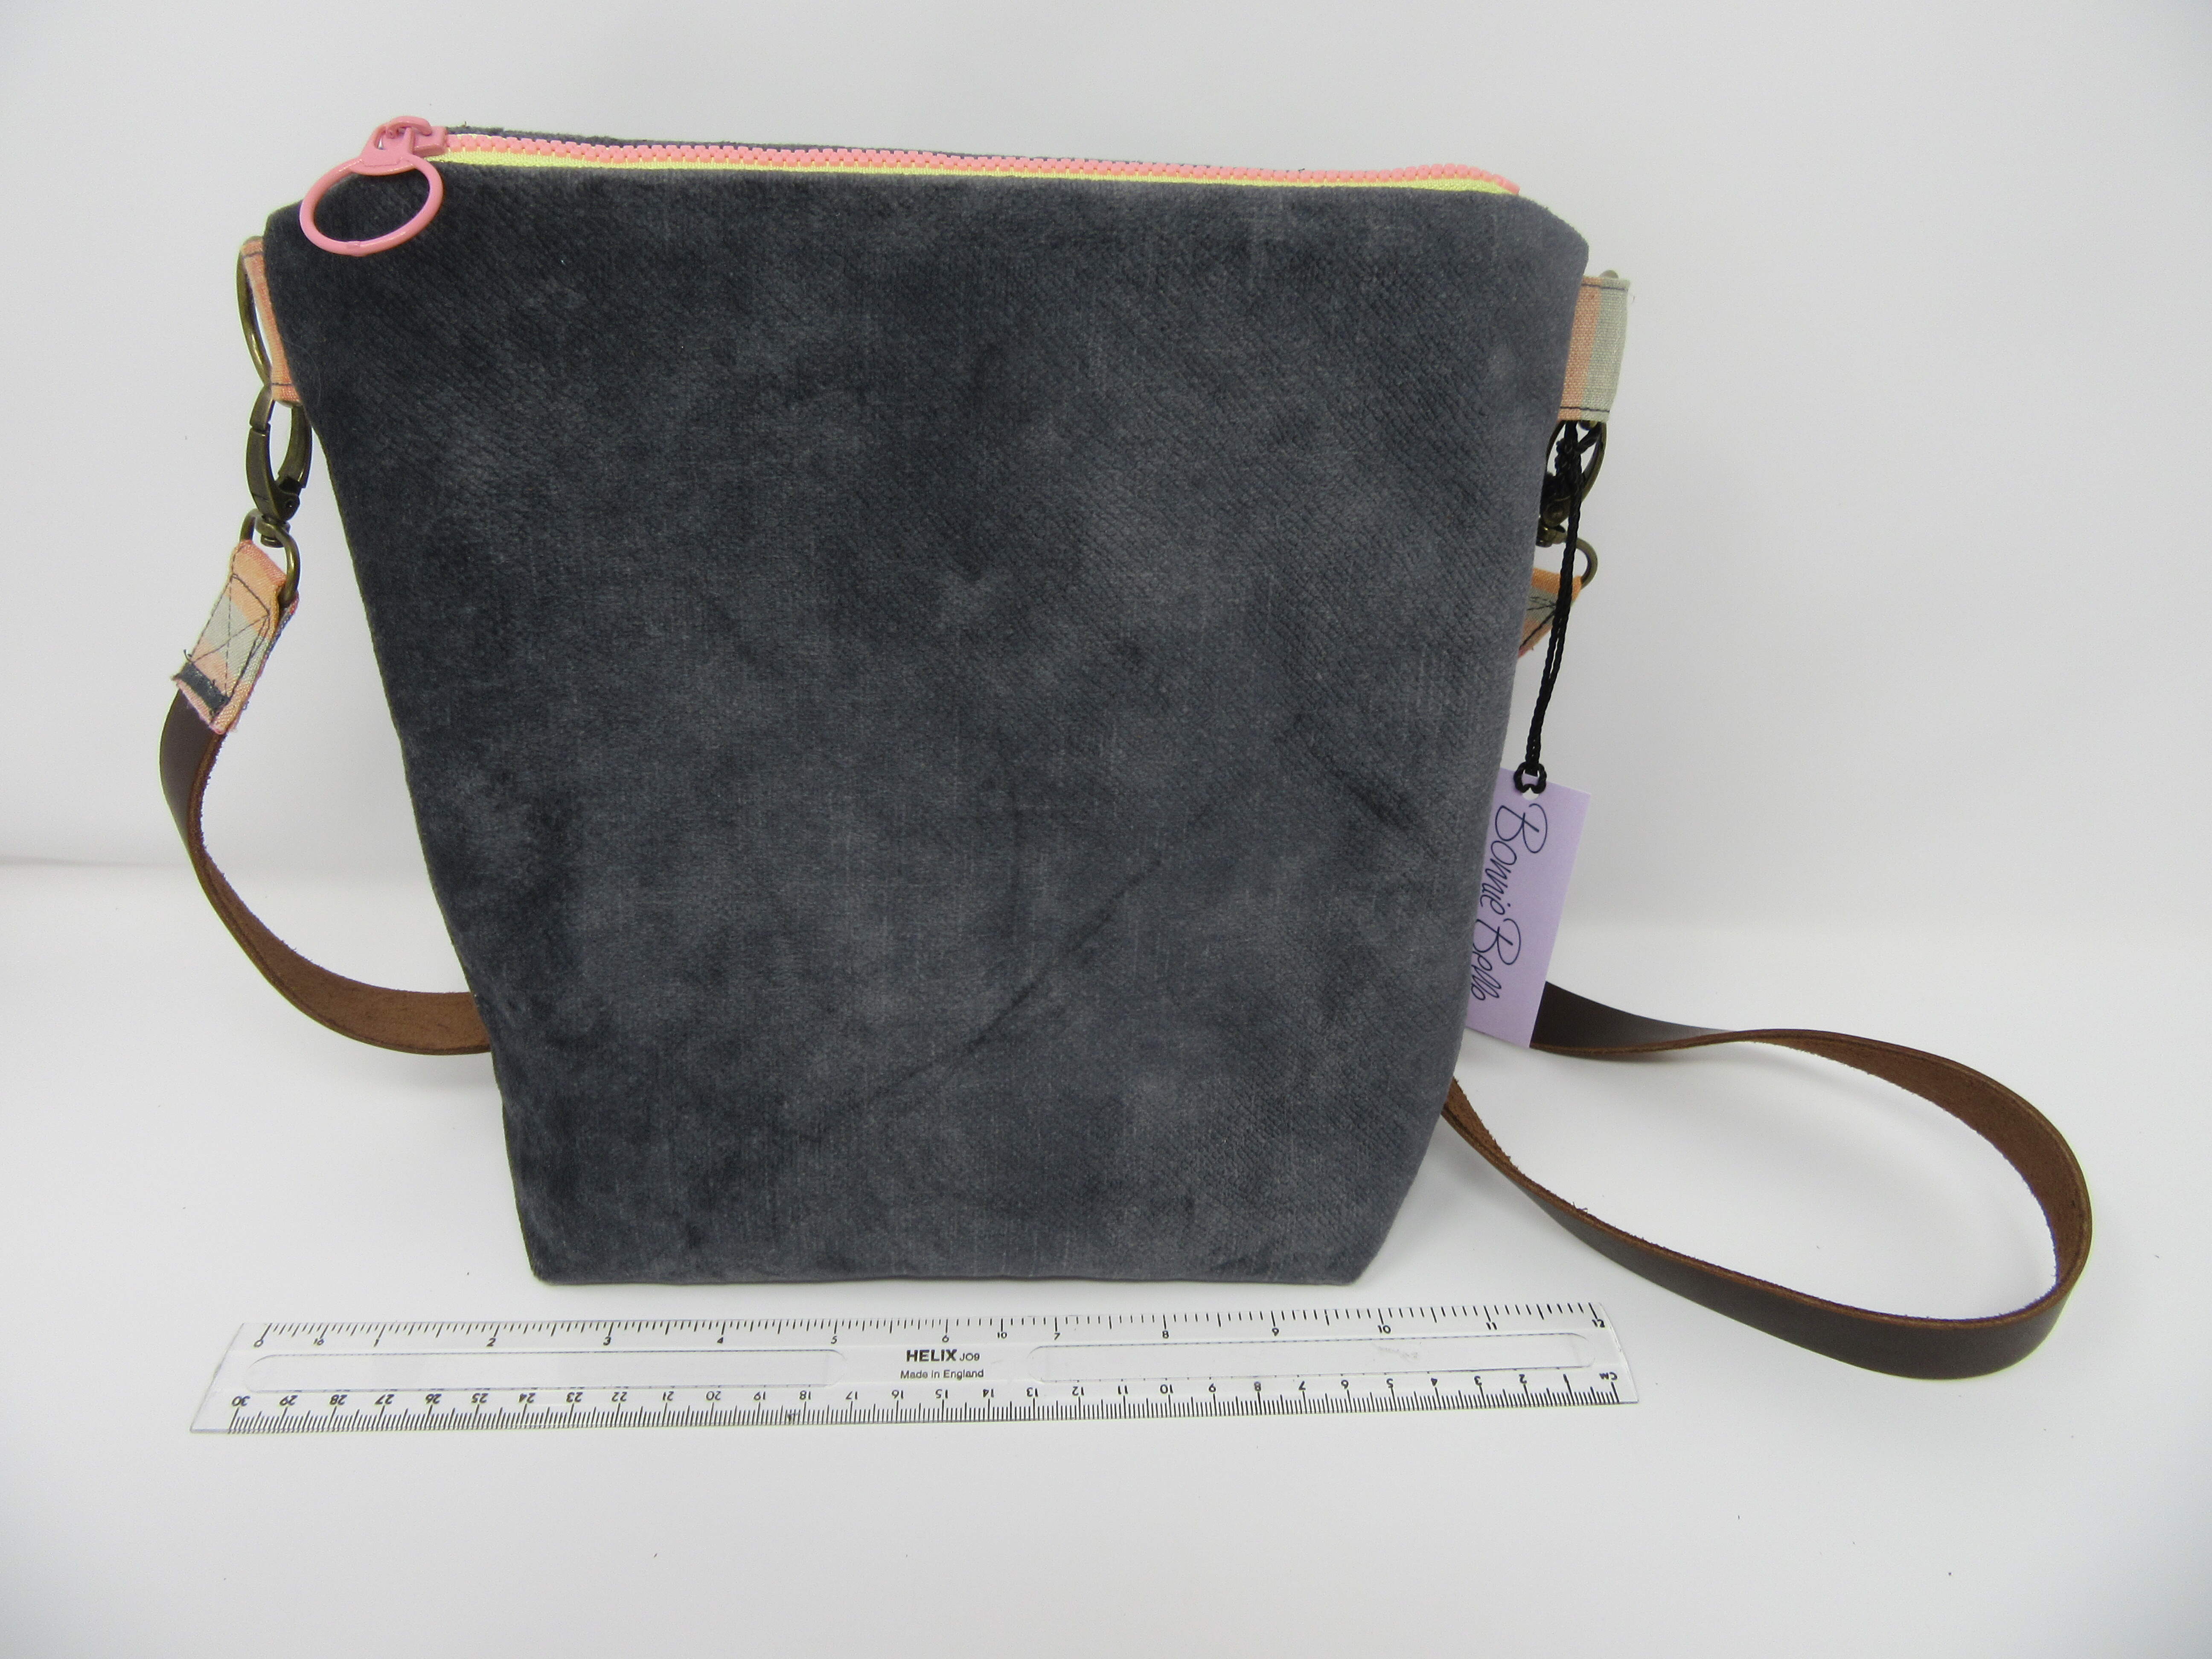 Velour bag with leather strap and pink zip